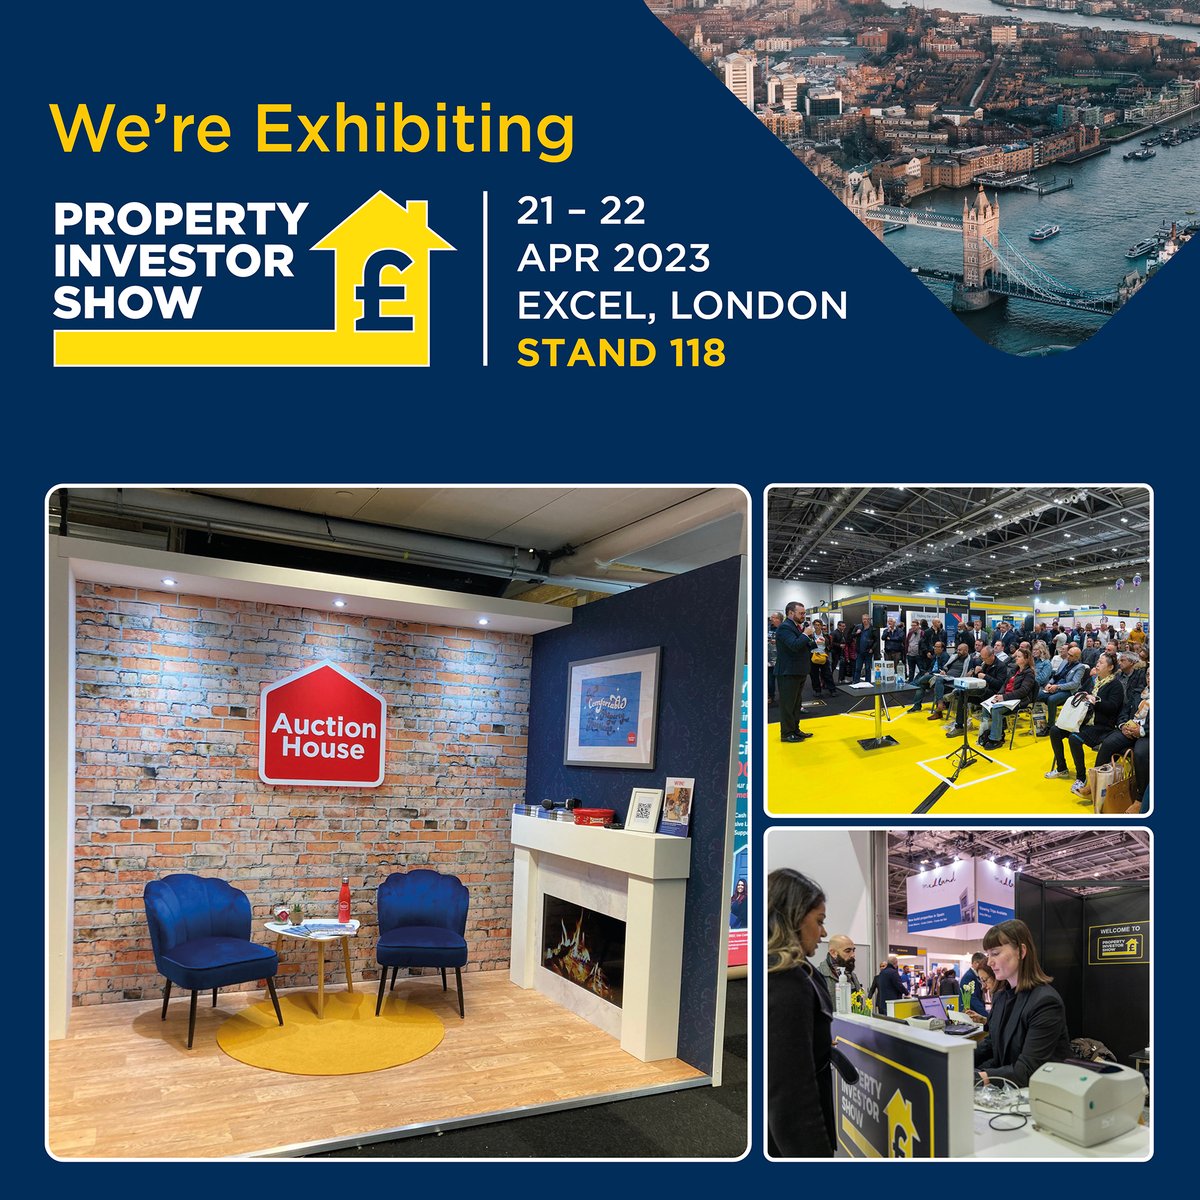 🏠 Attention all property investors! 

🔜 We are thrilled to announce our participation at the upcoming Property Investor Show next week.

👋🏼 See you there! 

#theonlywayisauction
#sellingmadesimple
#PropertyInvestorShow